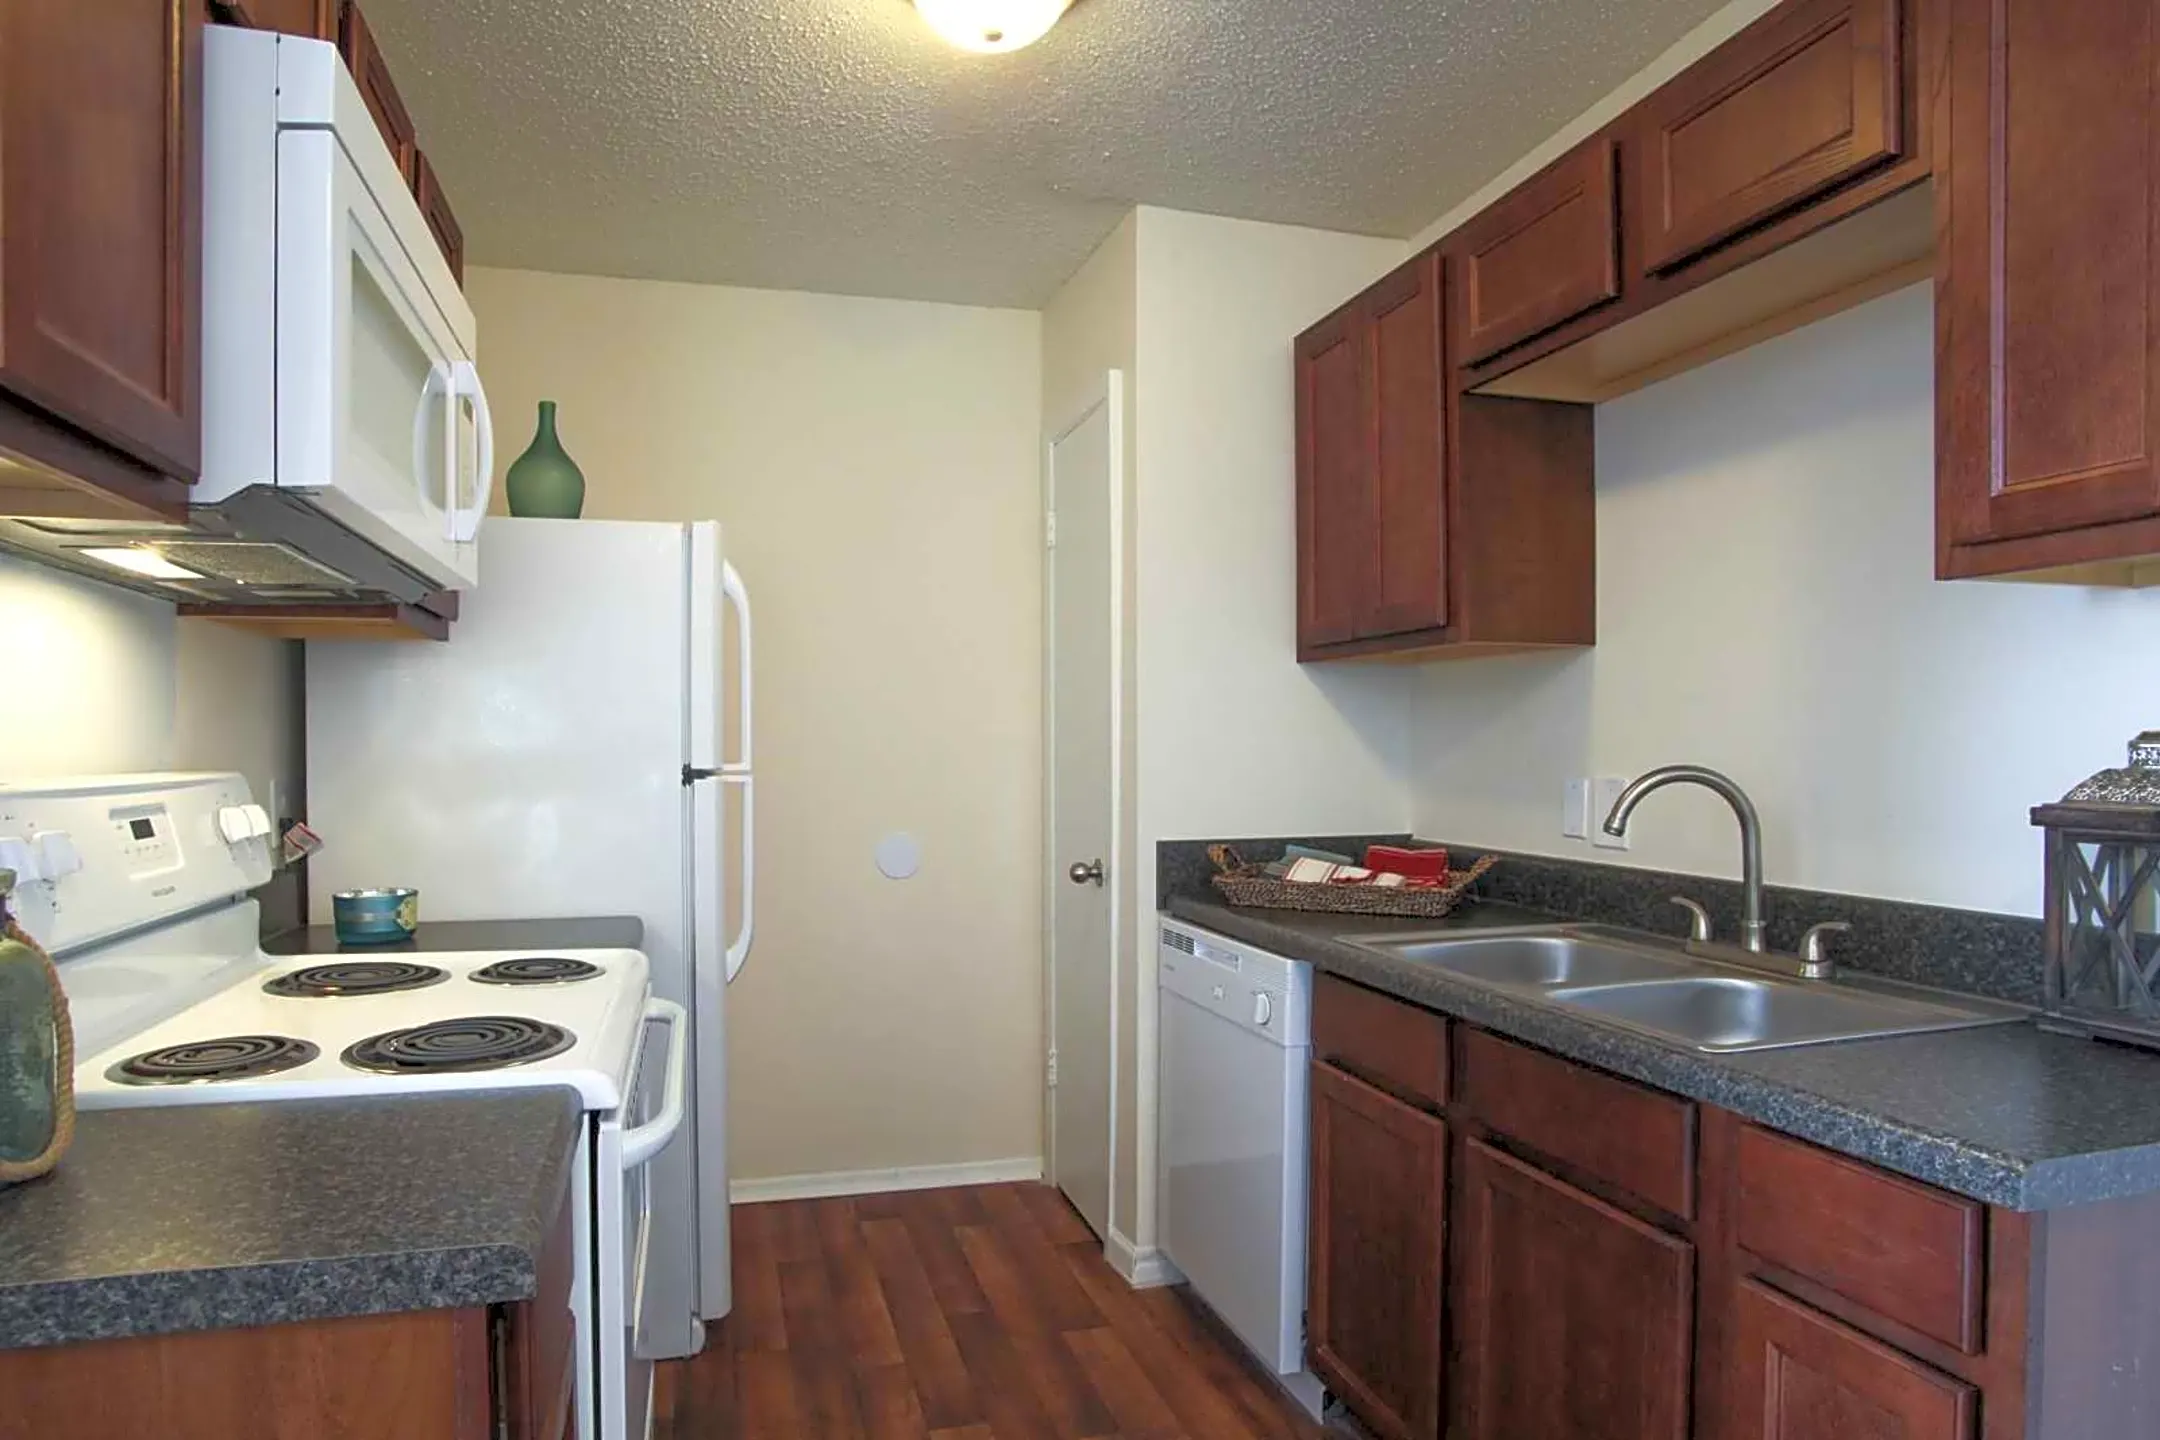 Kitchen - Country Haven Apartments - Saraland, AL